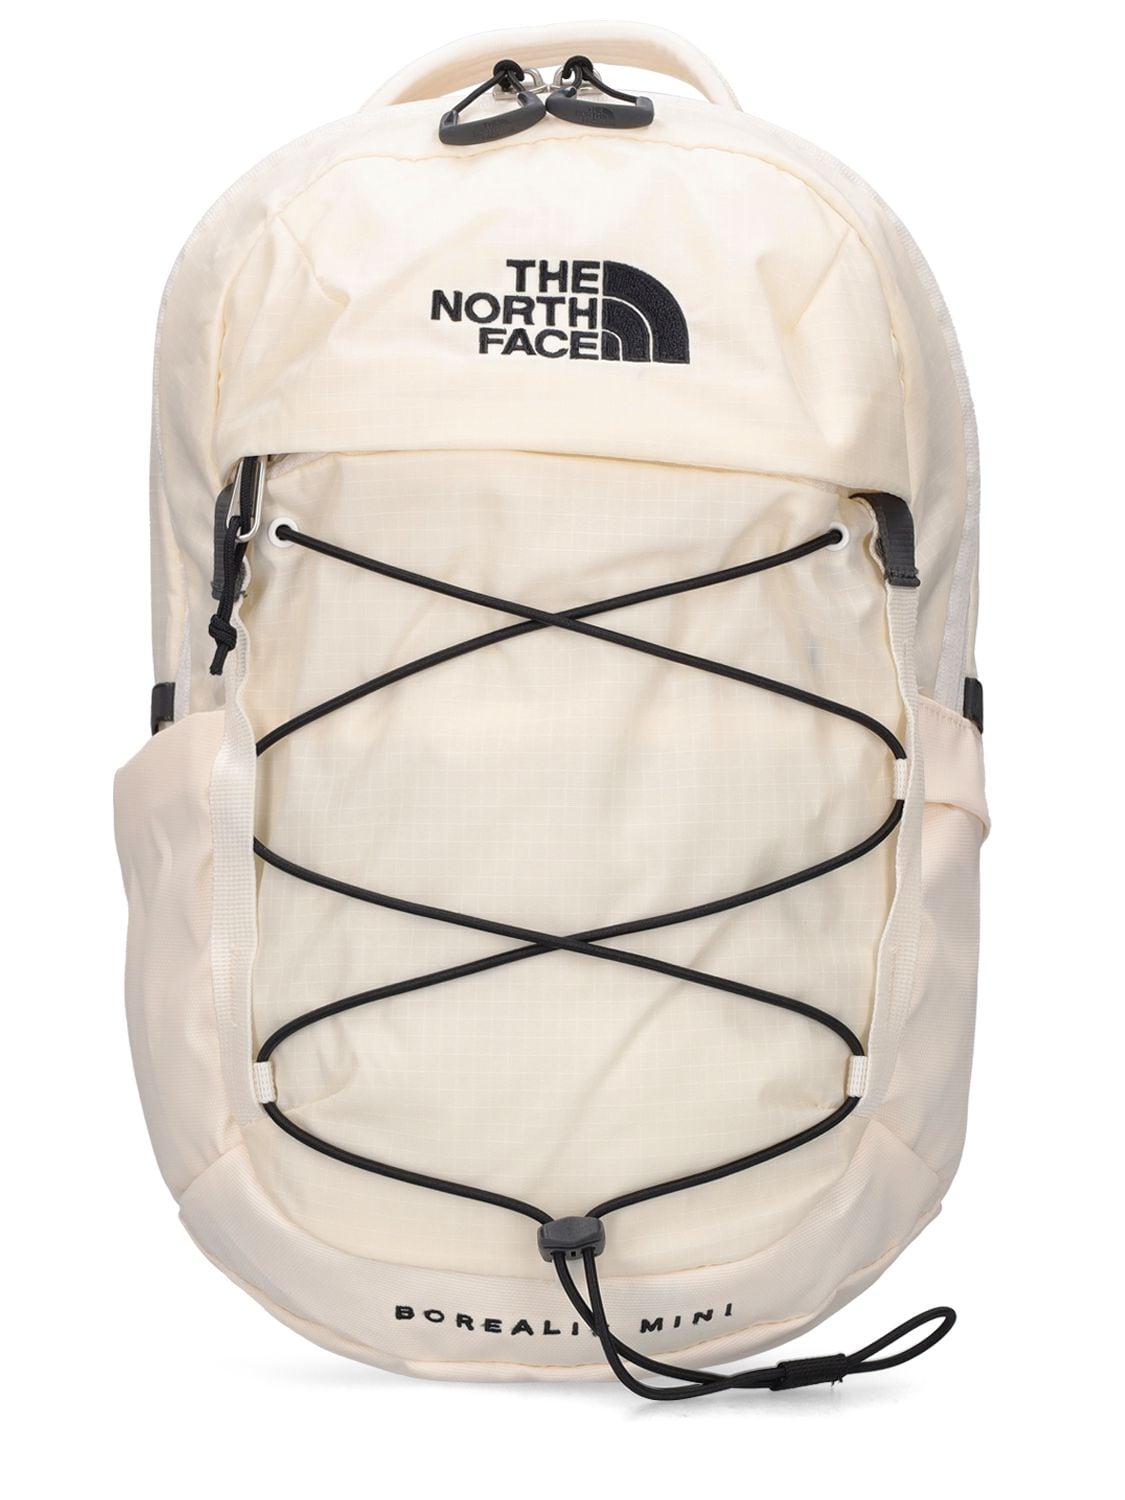 The North Face Borealis Mini Backpack In Beige